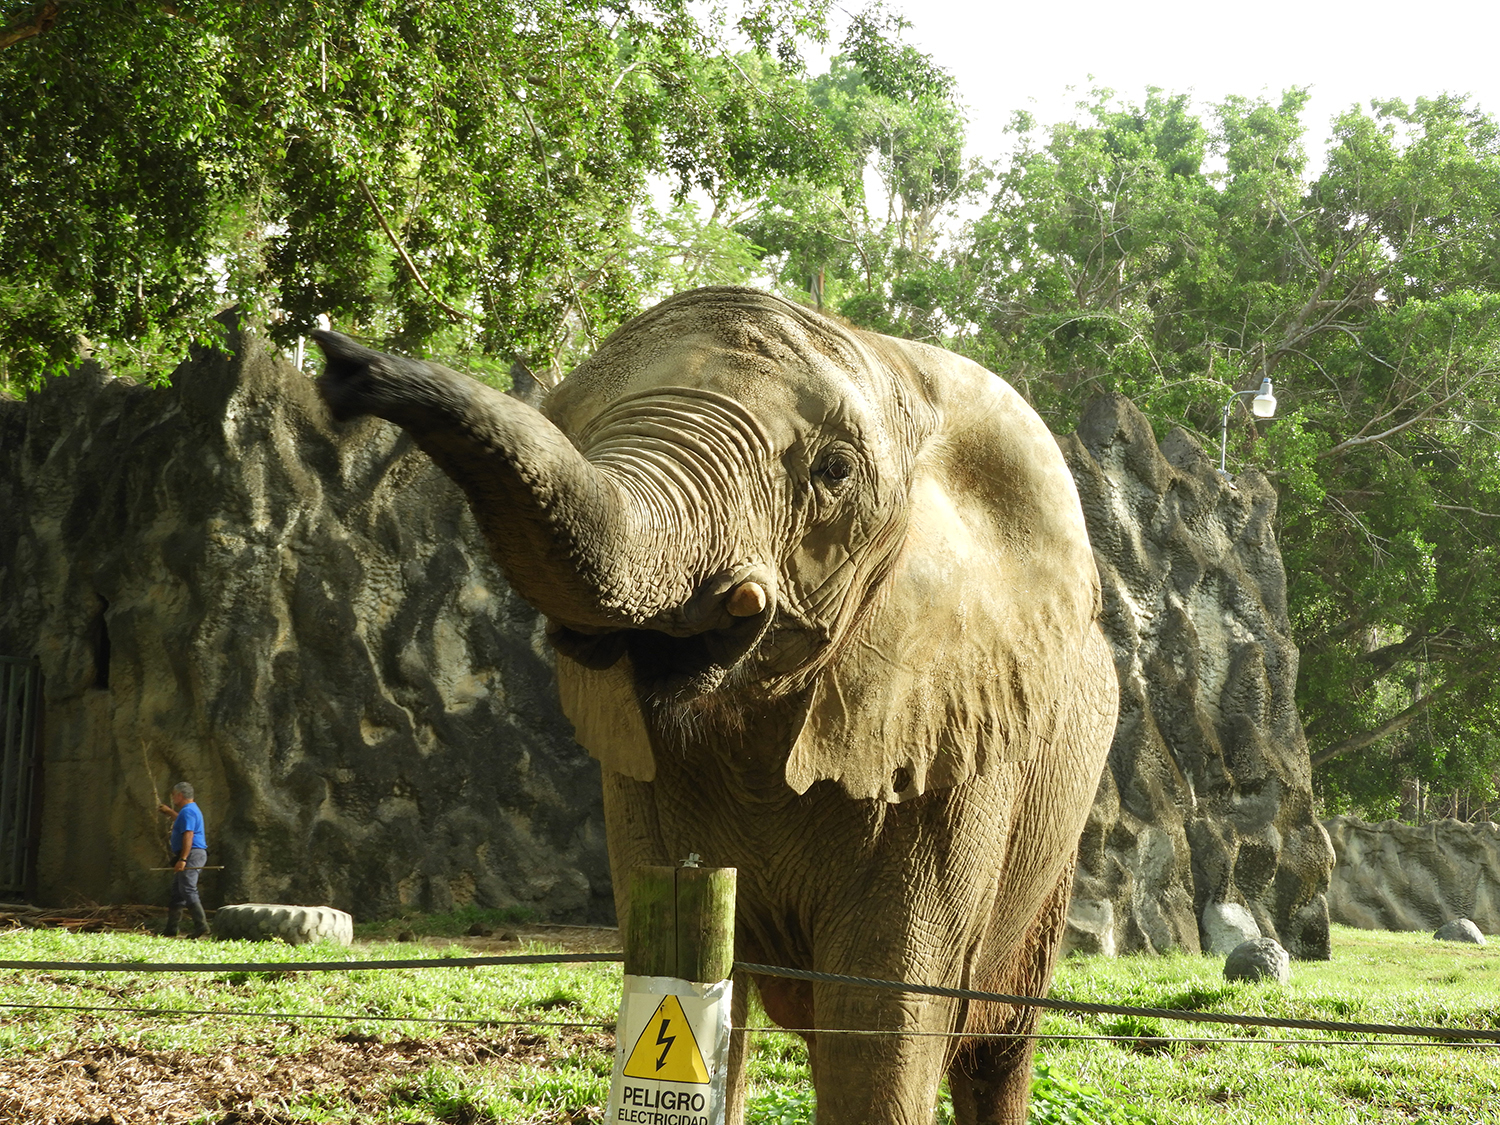 www.znewsservice.com liberation after 35 years rescued elephant finds sanctuary jam press jmp318005